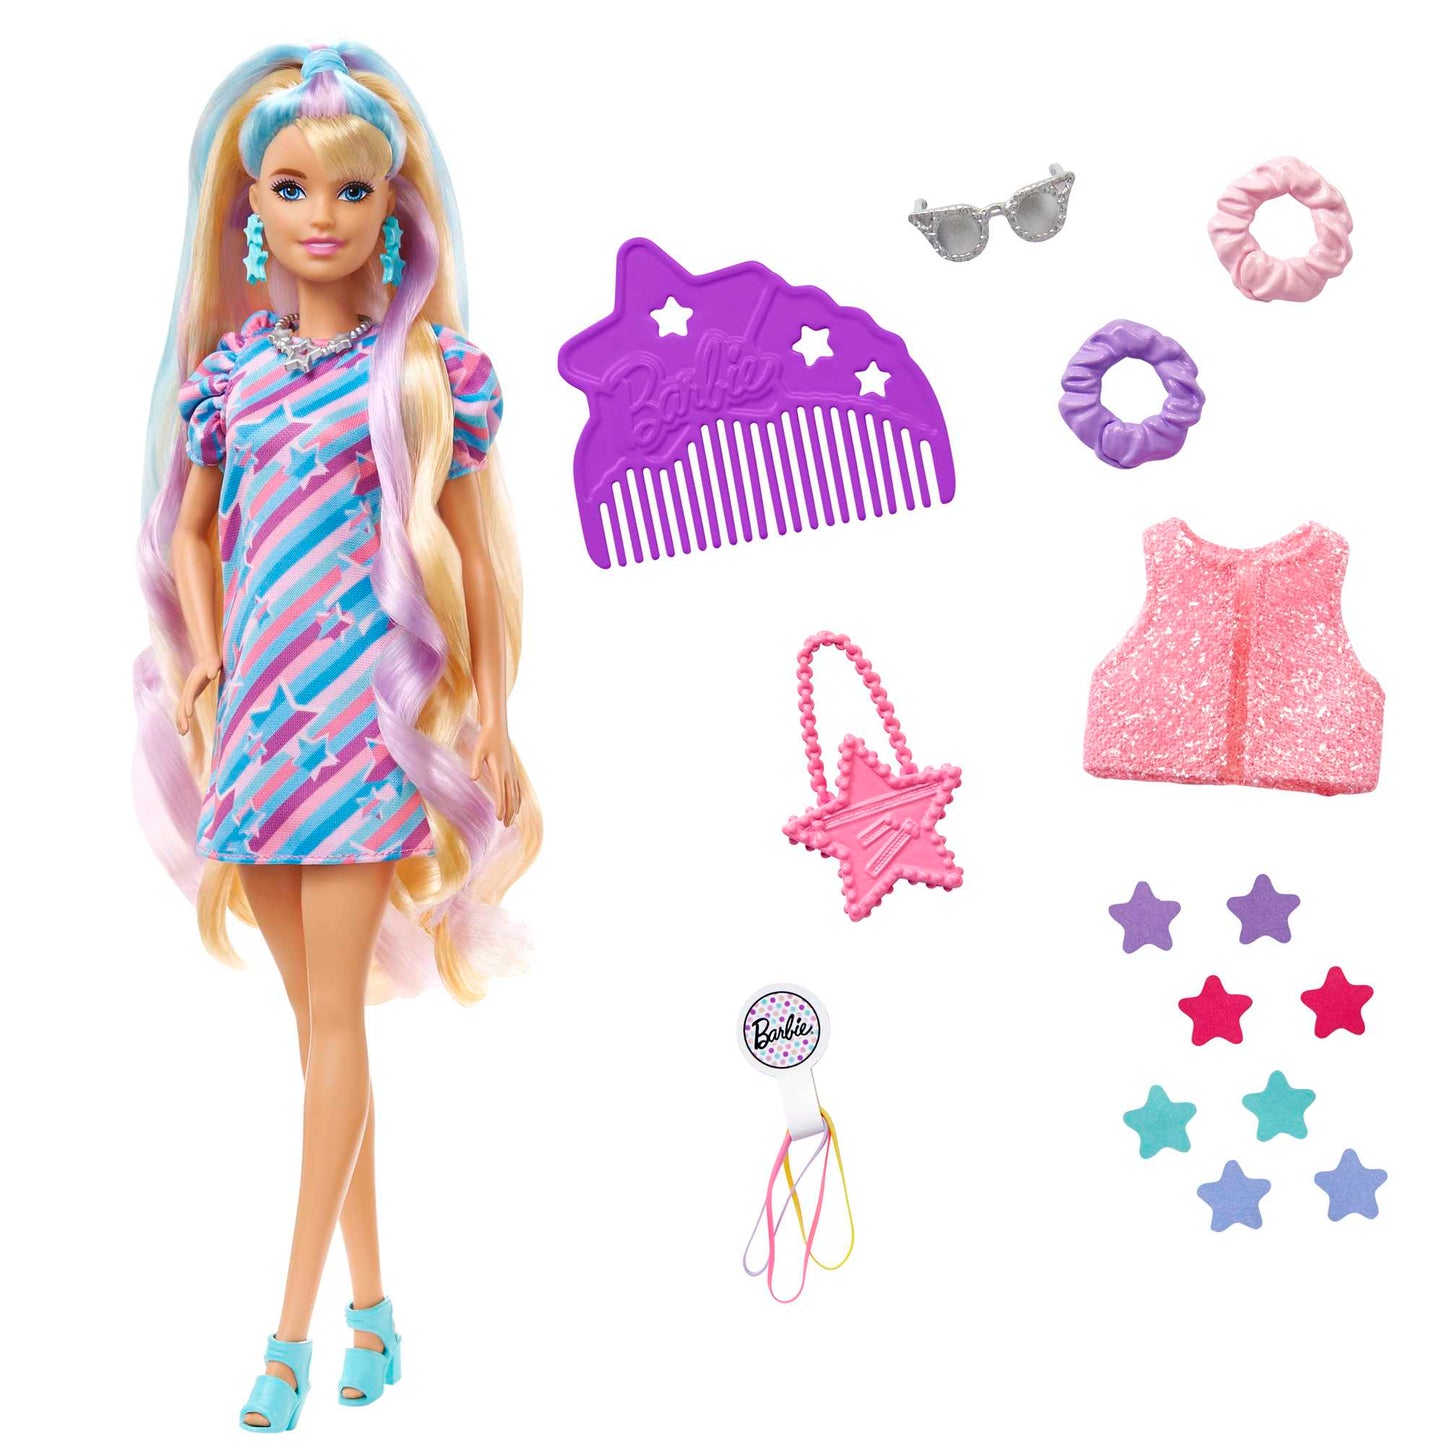 Barbie - Totally Hair Doll, Butterfly-Themed